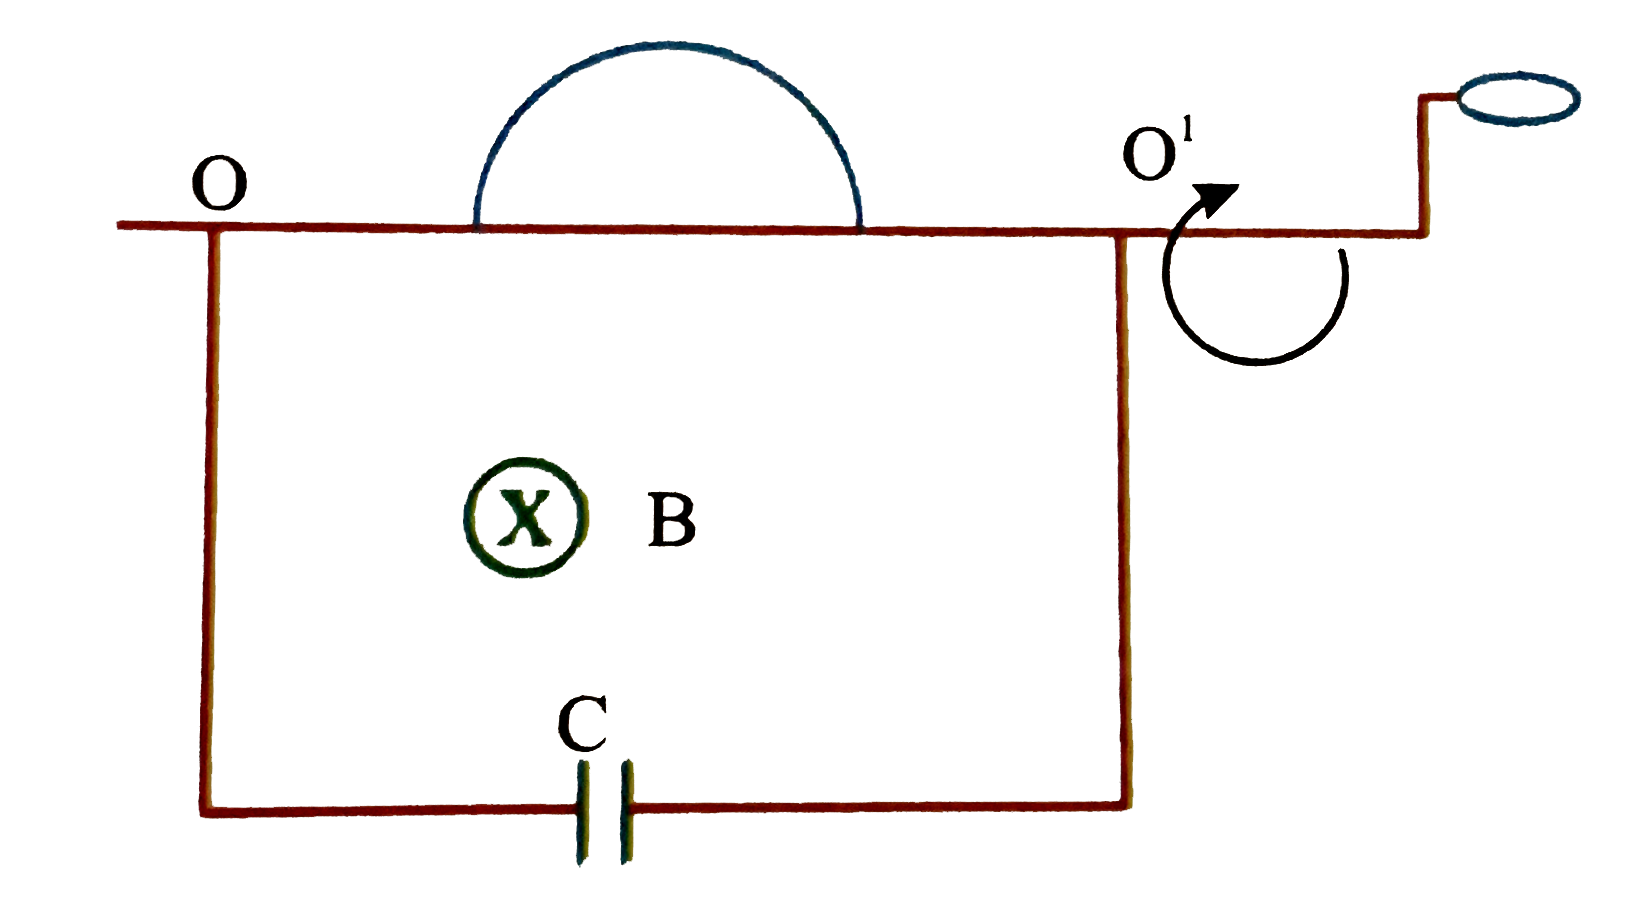 A copper rod is bent inot a semi-circle of radius a and at ends straight parts are bent along diameter of the semi-circle and are passed through fixed, smooth and conducting ring O and O' as shown in figure. A capacitor having capacitance C is connected to the rings. The system is located in a uniform magnetic field of induction B such that axis of rotation O O' is perpendicular to the field direction. At initial moment of time (t = 0), plane of semi-circle was normal to the field direction and the semi-circle is set in rotation with constant angular velocity omega. Neglect the resistance and inductance of the circuit. The current flowing through the circuit as function of time is